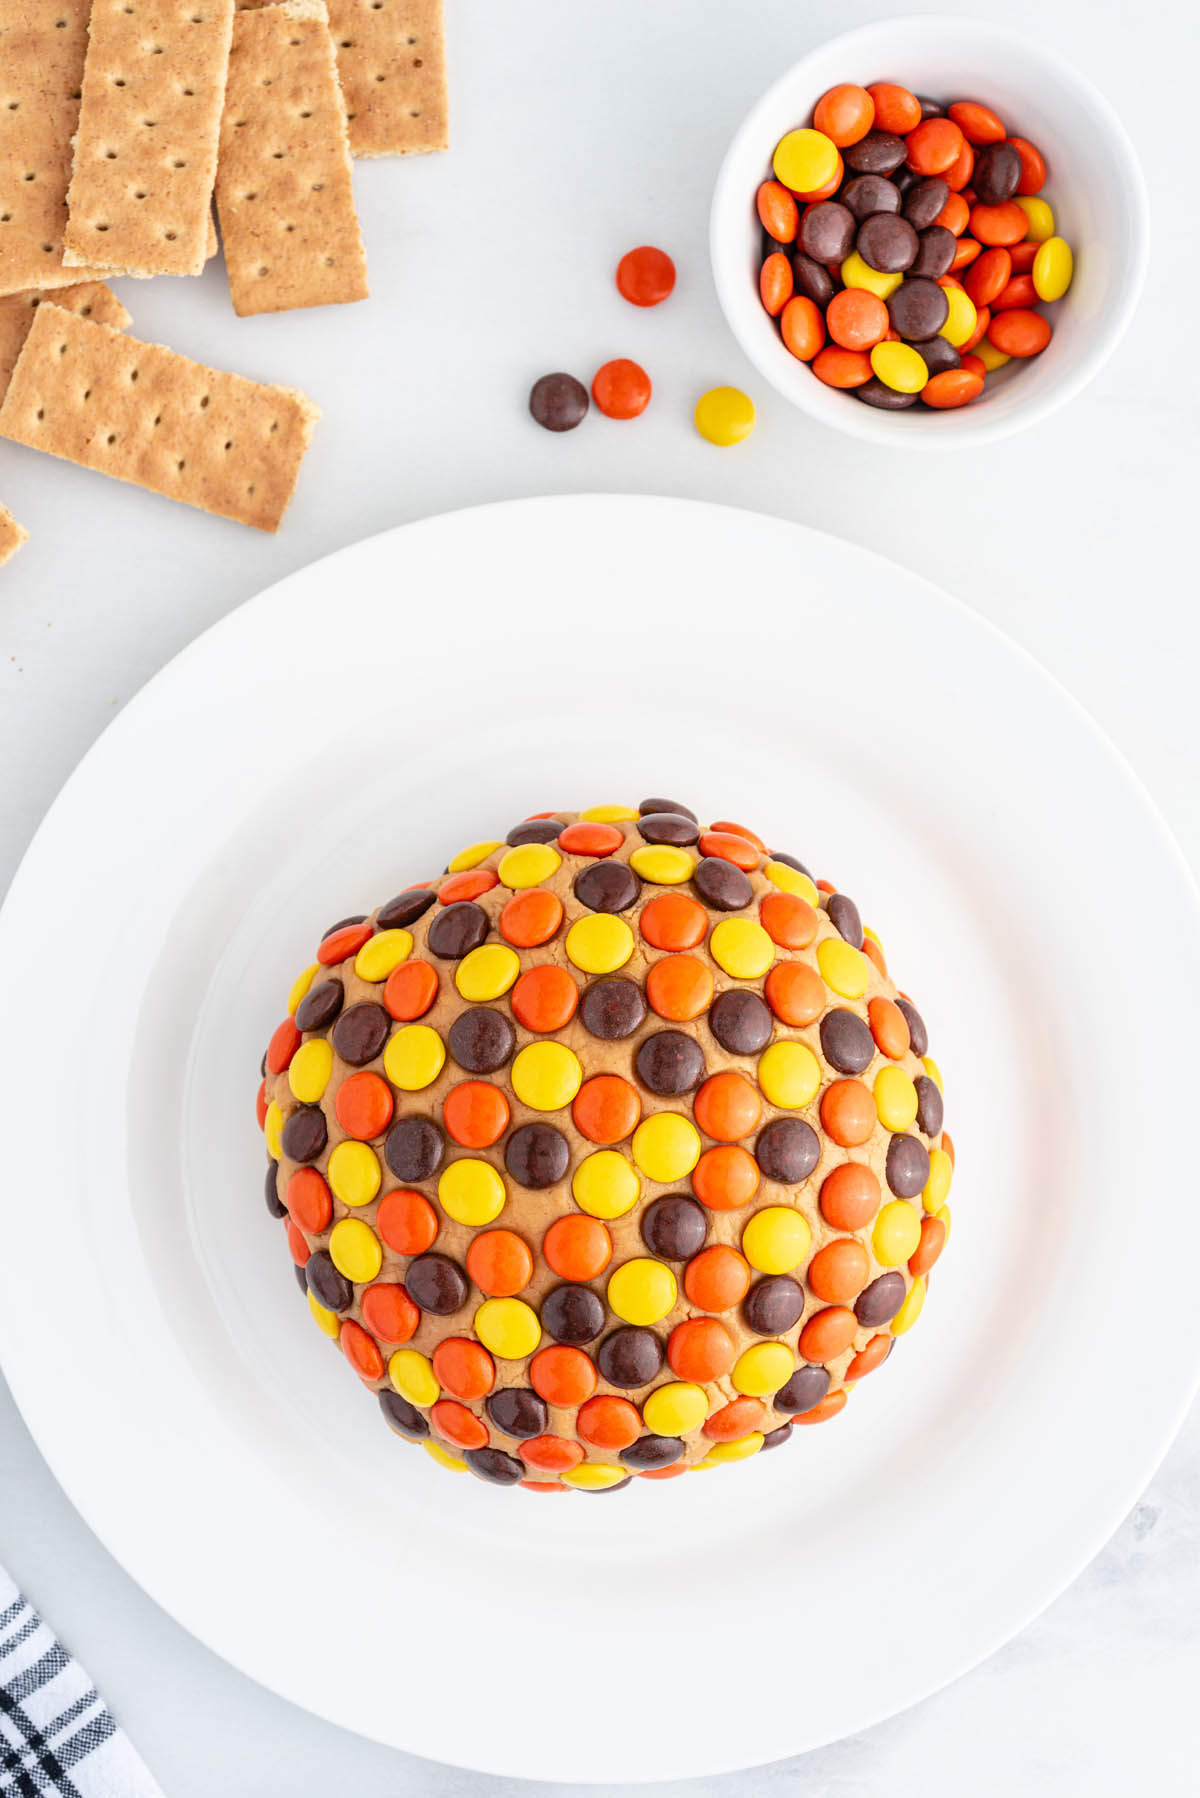 cover with reese's pieces